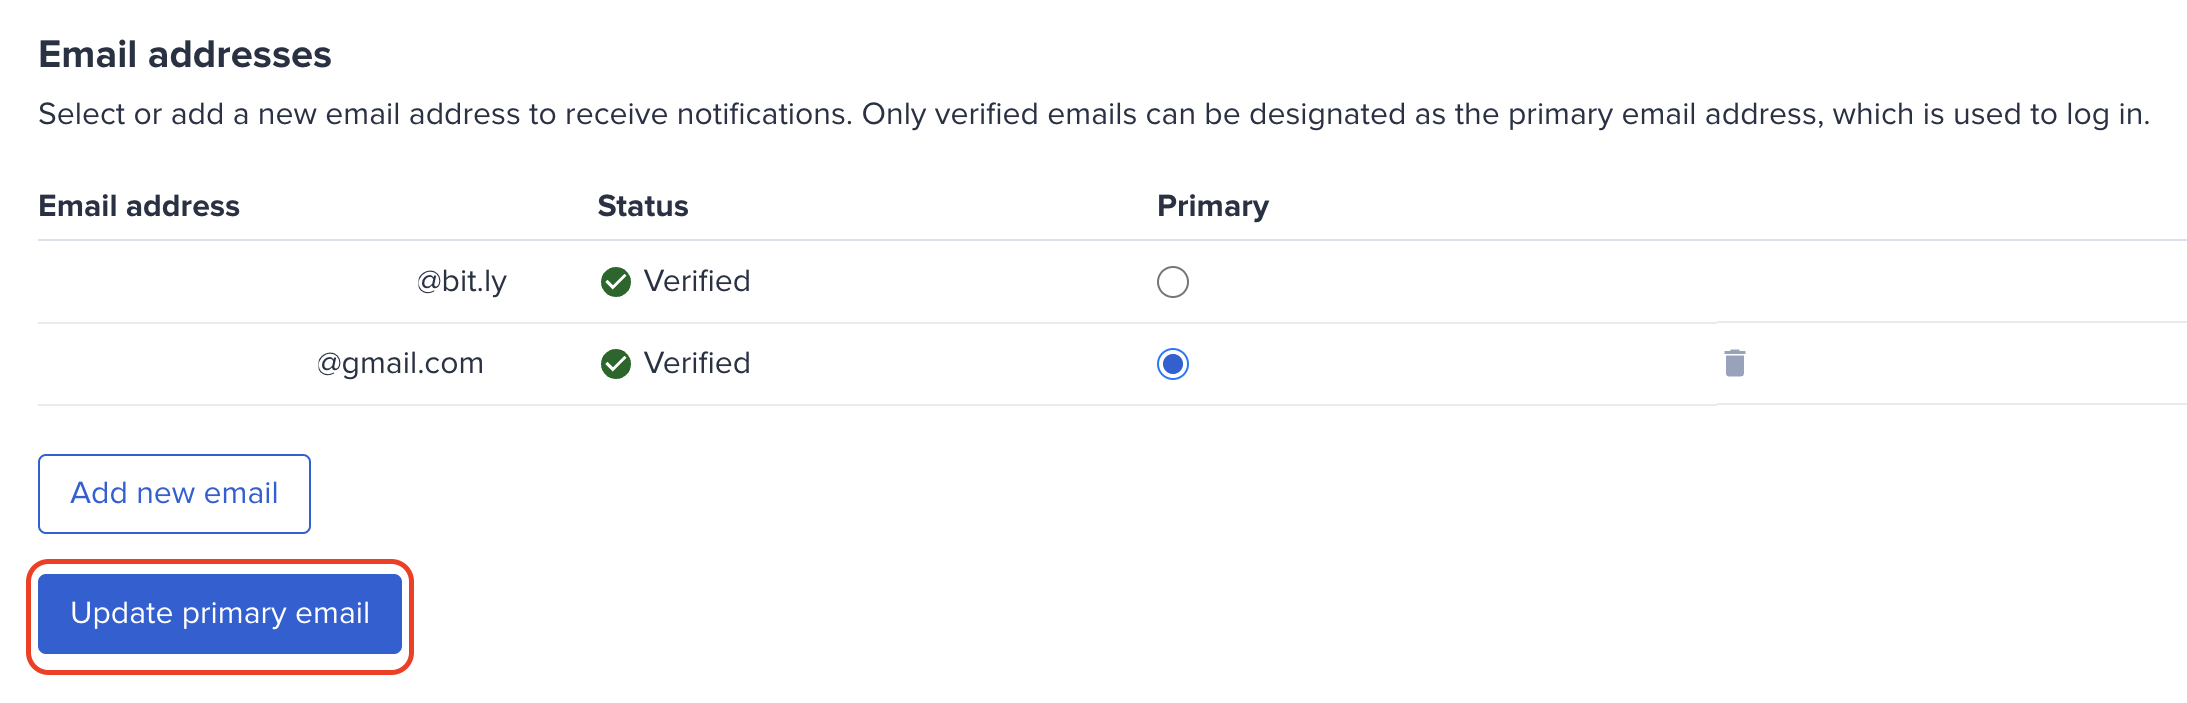 Bitly_settings_update_primary_email.png